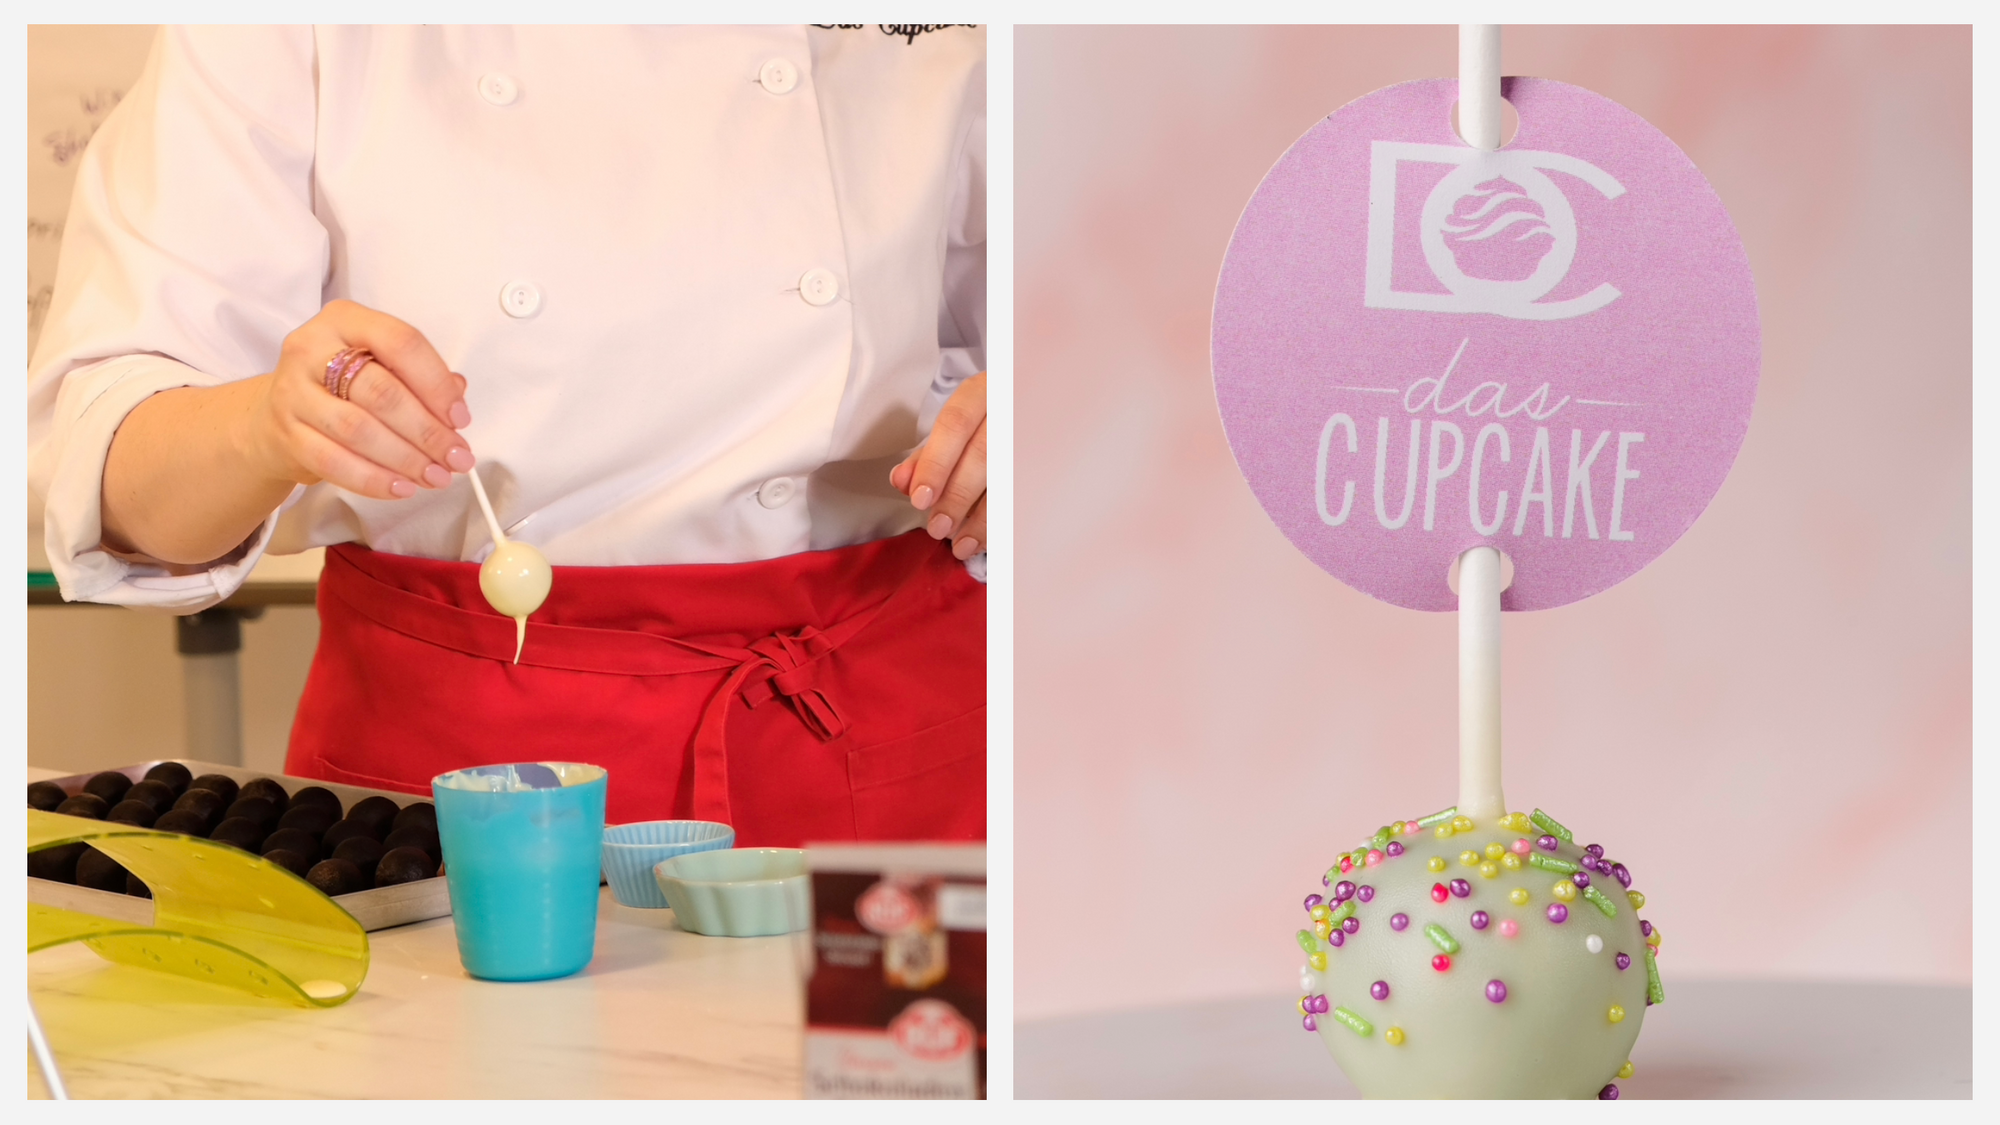 Junggesellinnen Backparty Event mit Cake Pops